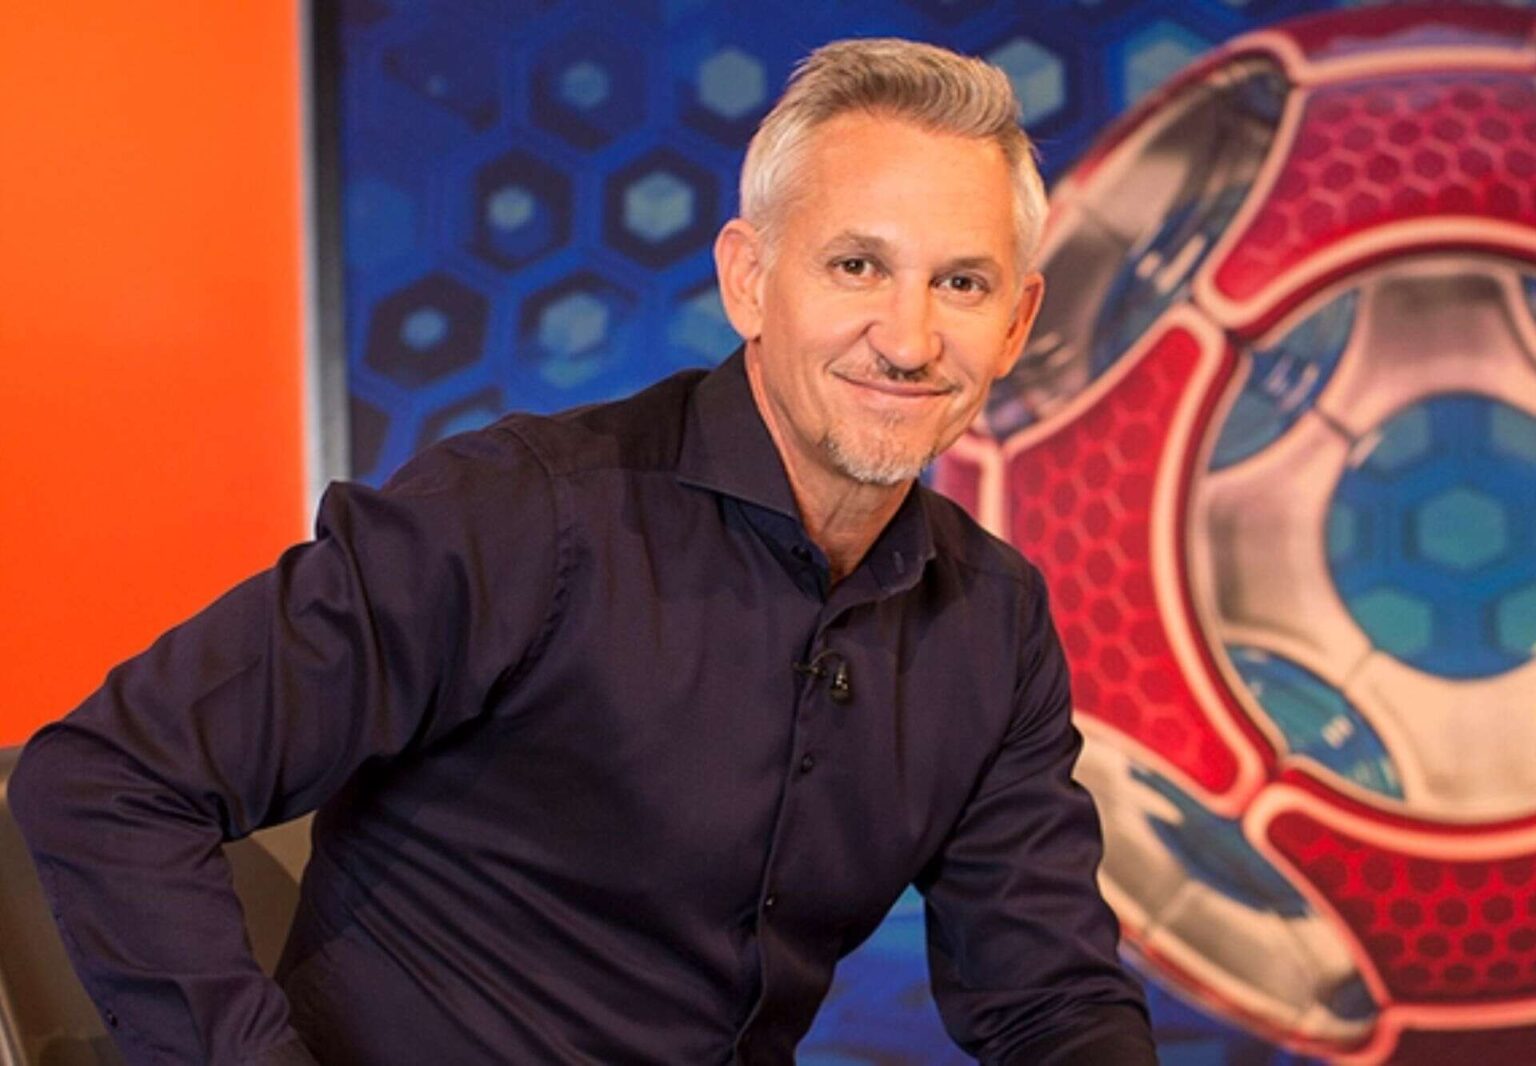 Gary Lineker will return to Match of the Day in days, BBC confirms as broadcaster apologises for row but host DOESN’T